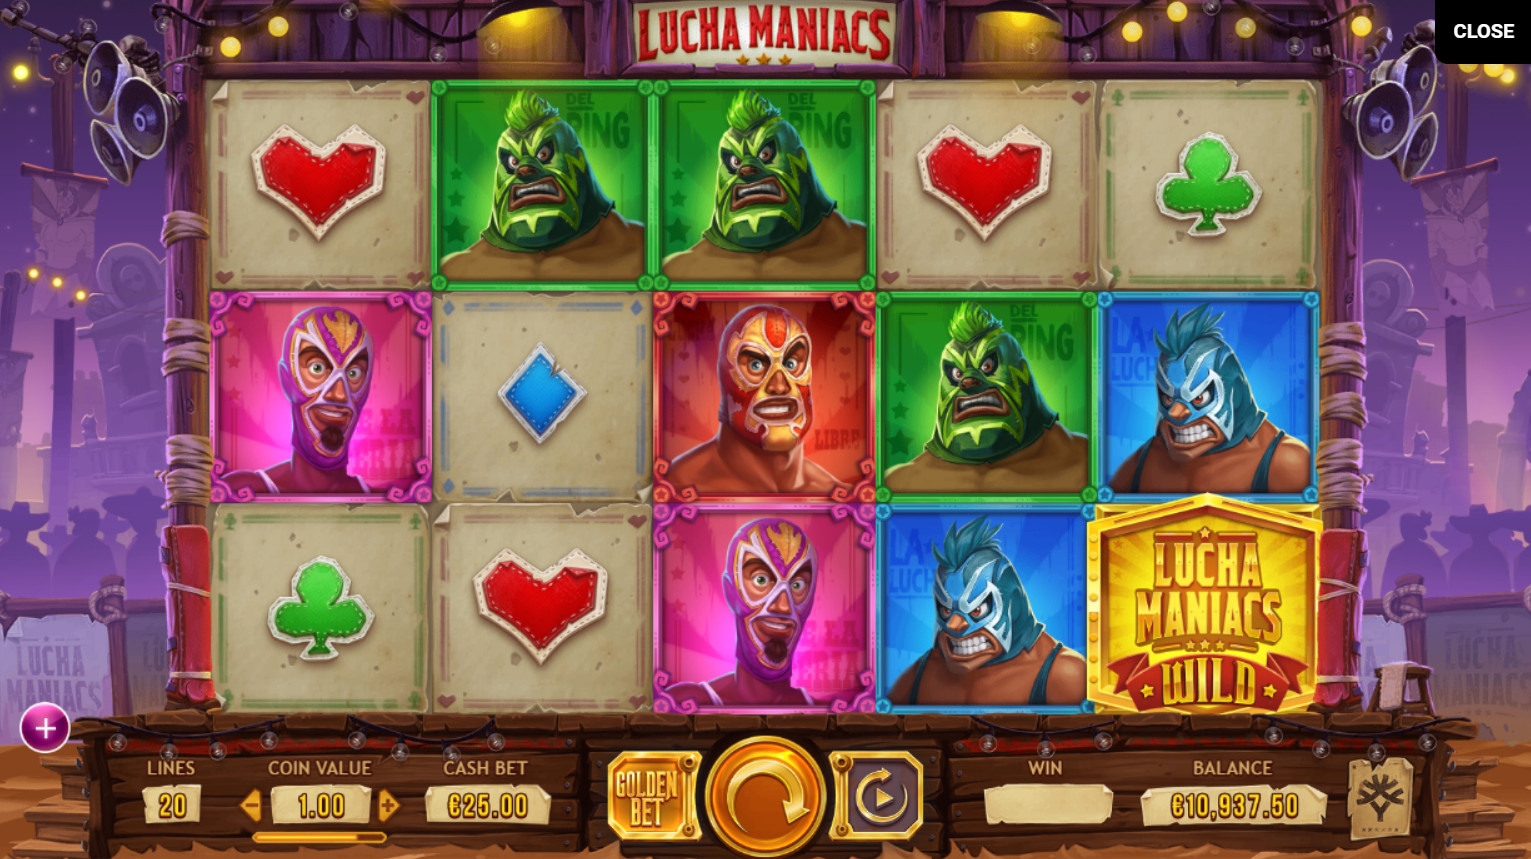 Lucha Maniacs (Lucha Maniacs) from category Slots